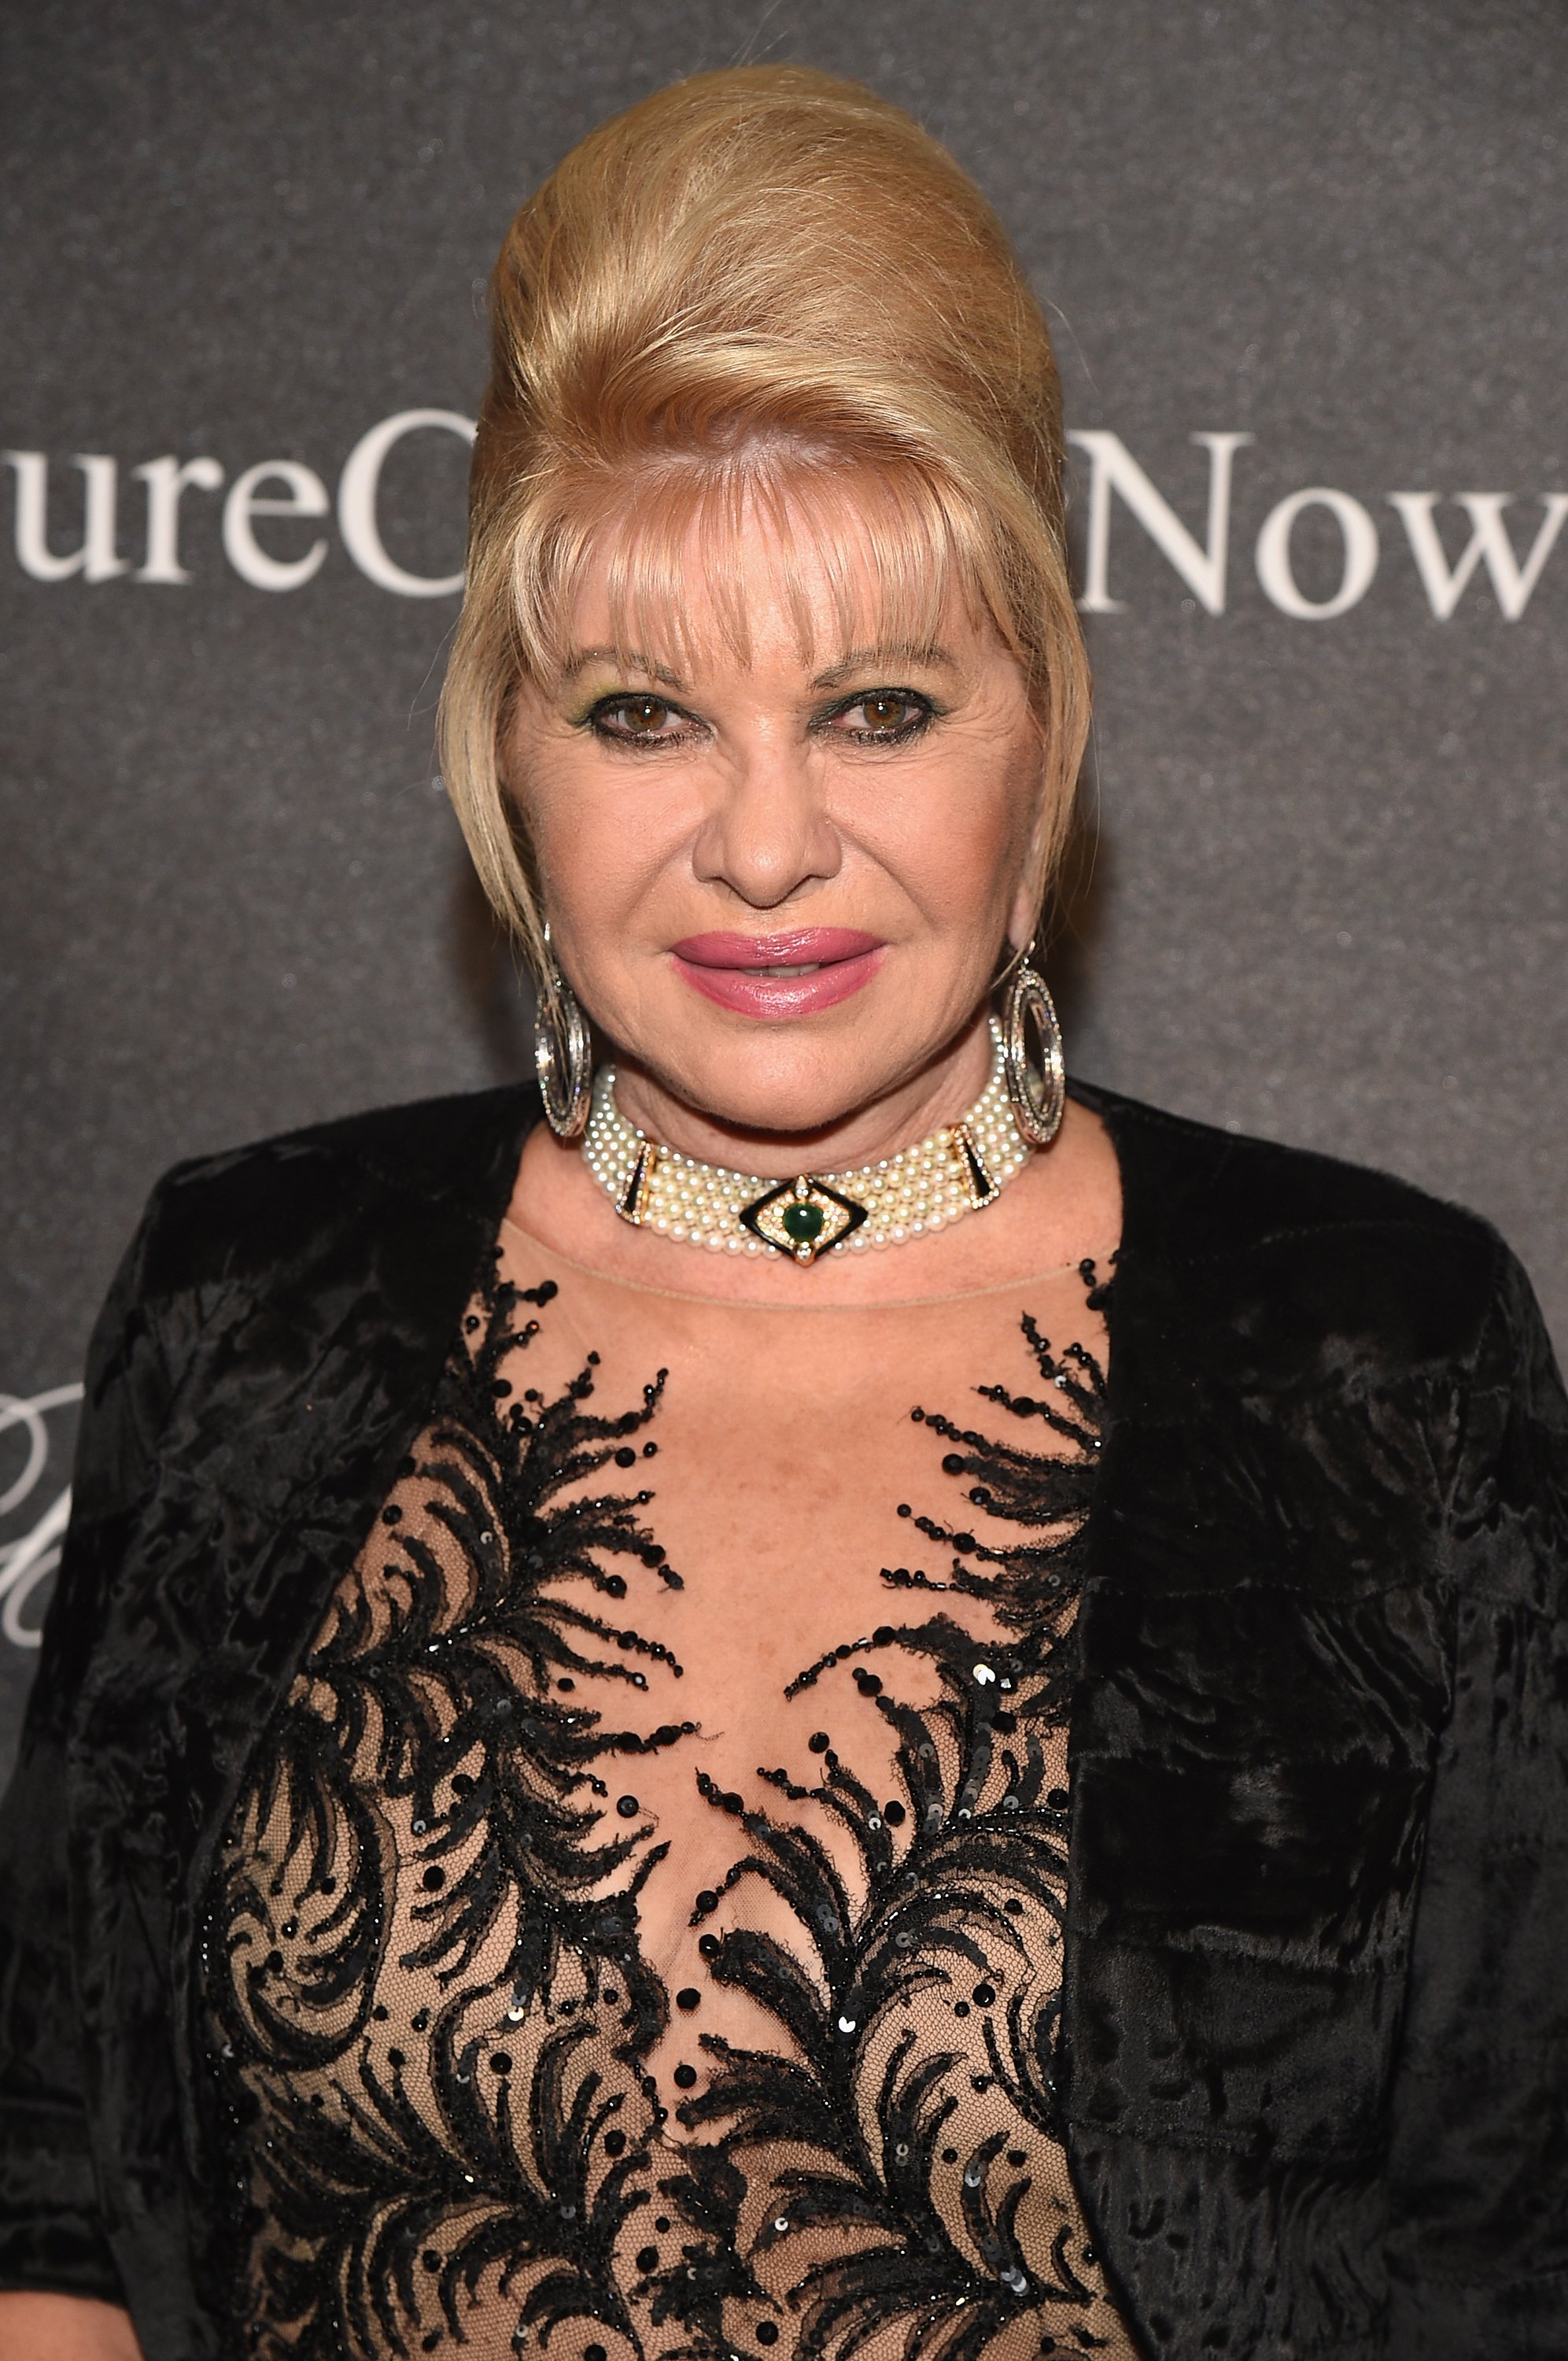 Businesswoman Ivana Trump attending Angel Ball 2015 at Cipriani Wall Street on October 19, 2015 in New York City.┃Source: Getty Images